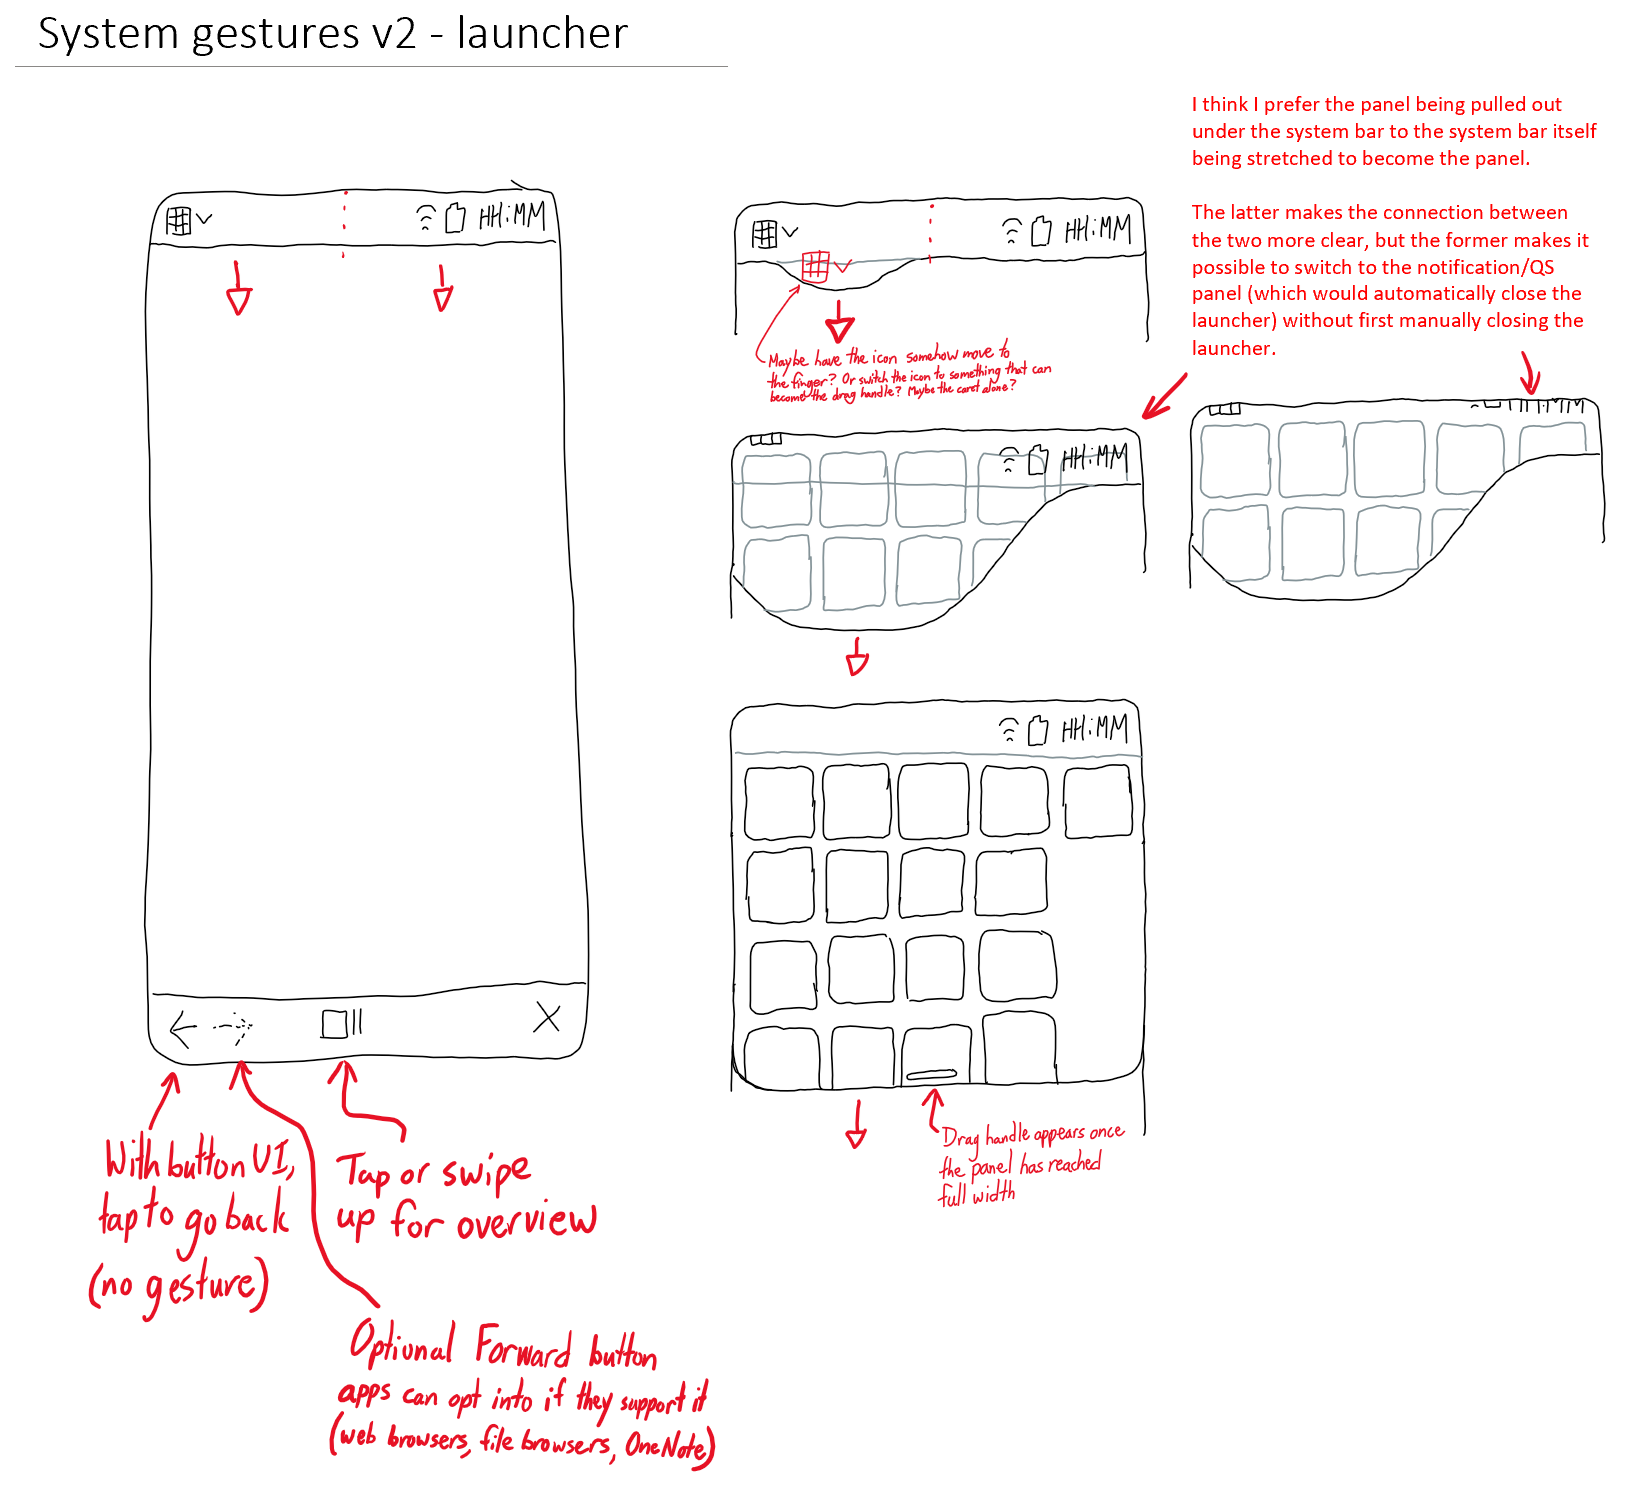 A sketch titled, System gestures v2 - launcher.  The status bar is now at the top.  Swipe down from the top-left to pull a ripple down that expands into the launcher.  I think I prefer the panel being pull out under the system bar to the system bar itself being stretched to become the panel.  The latter makes the connection between the two more clear, but the former makes it possible to switch to the notification/QS panel without first closing the launcher.  The bottom bar contains window controls, with back and optional forward button at the left, overview button in the middle, and close button at the right.